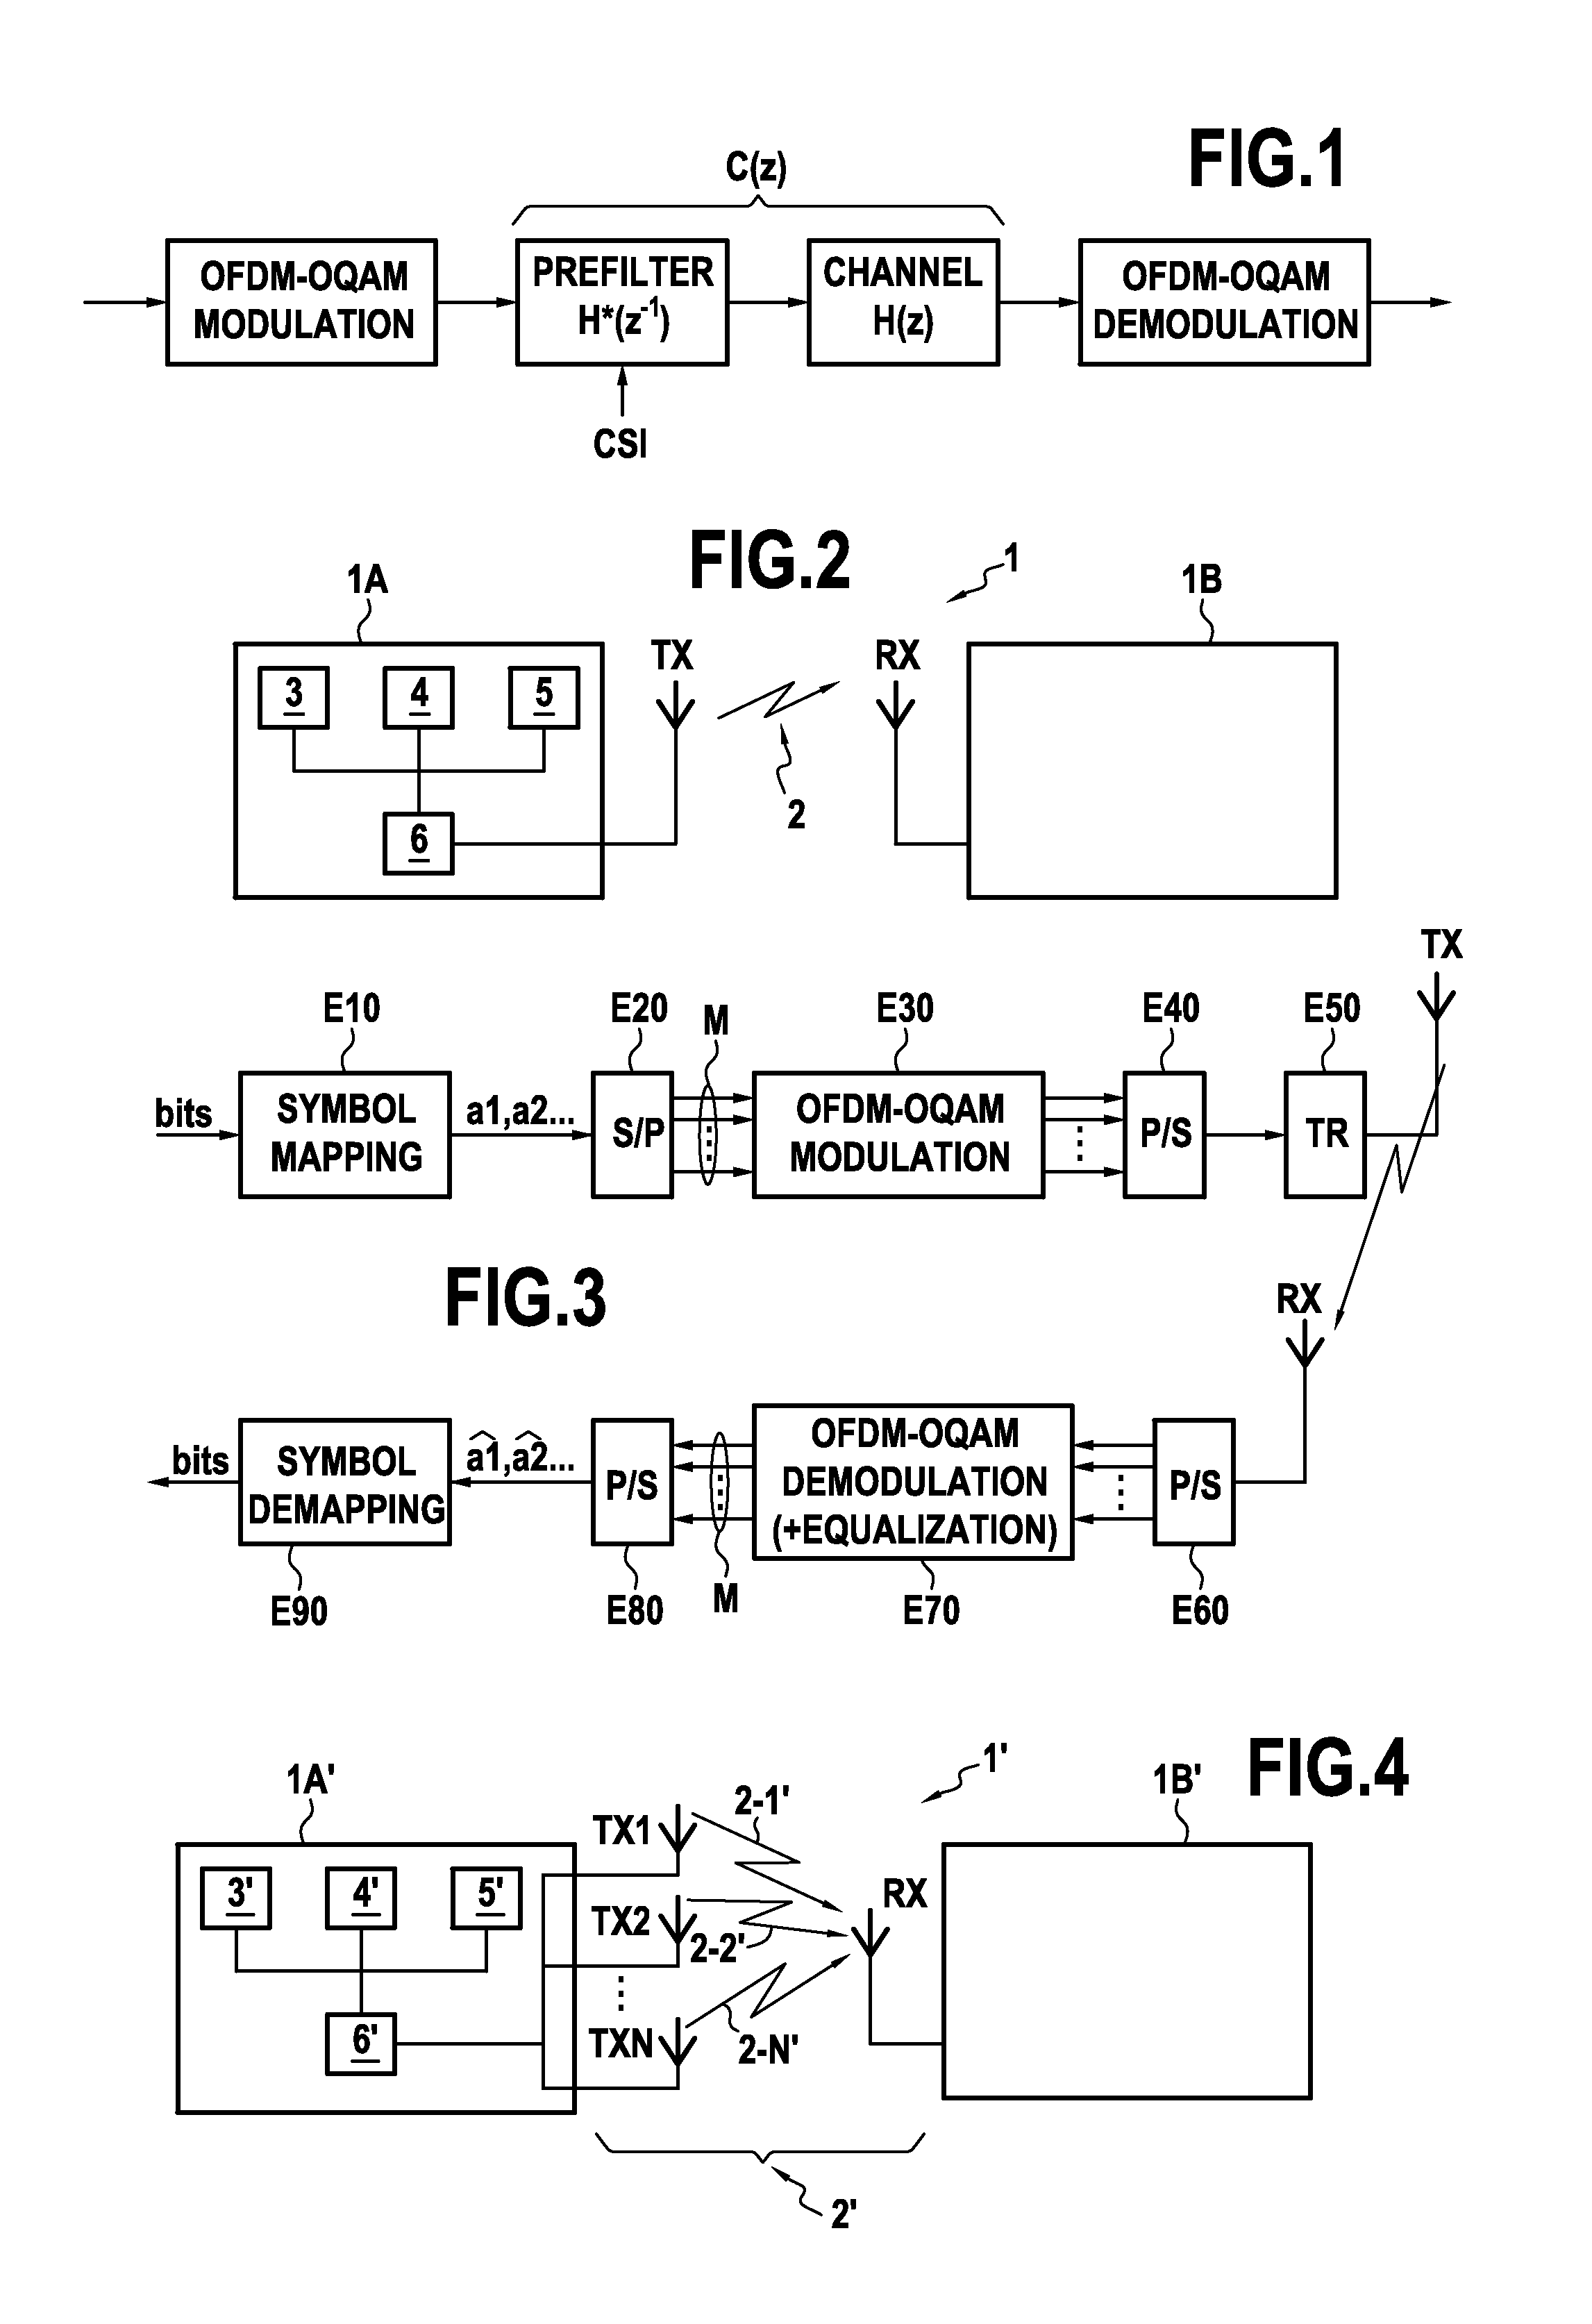 Method for transmitting at least one multi-carrier signal consisting of ofdm-oqam symbols